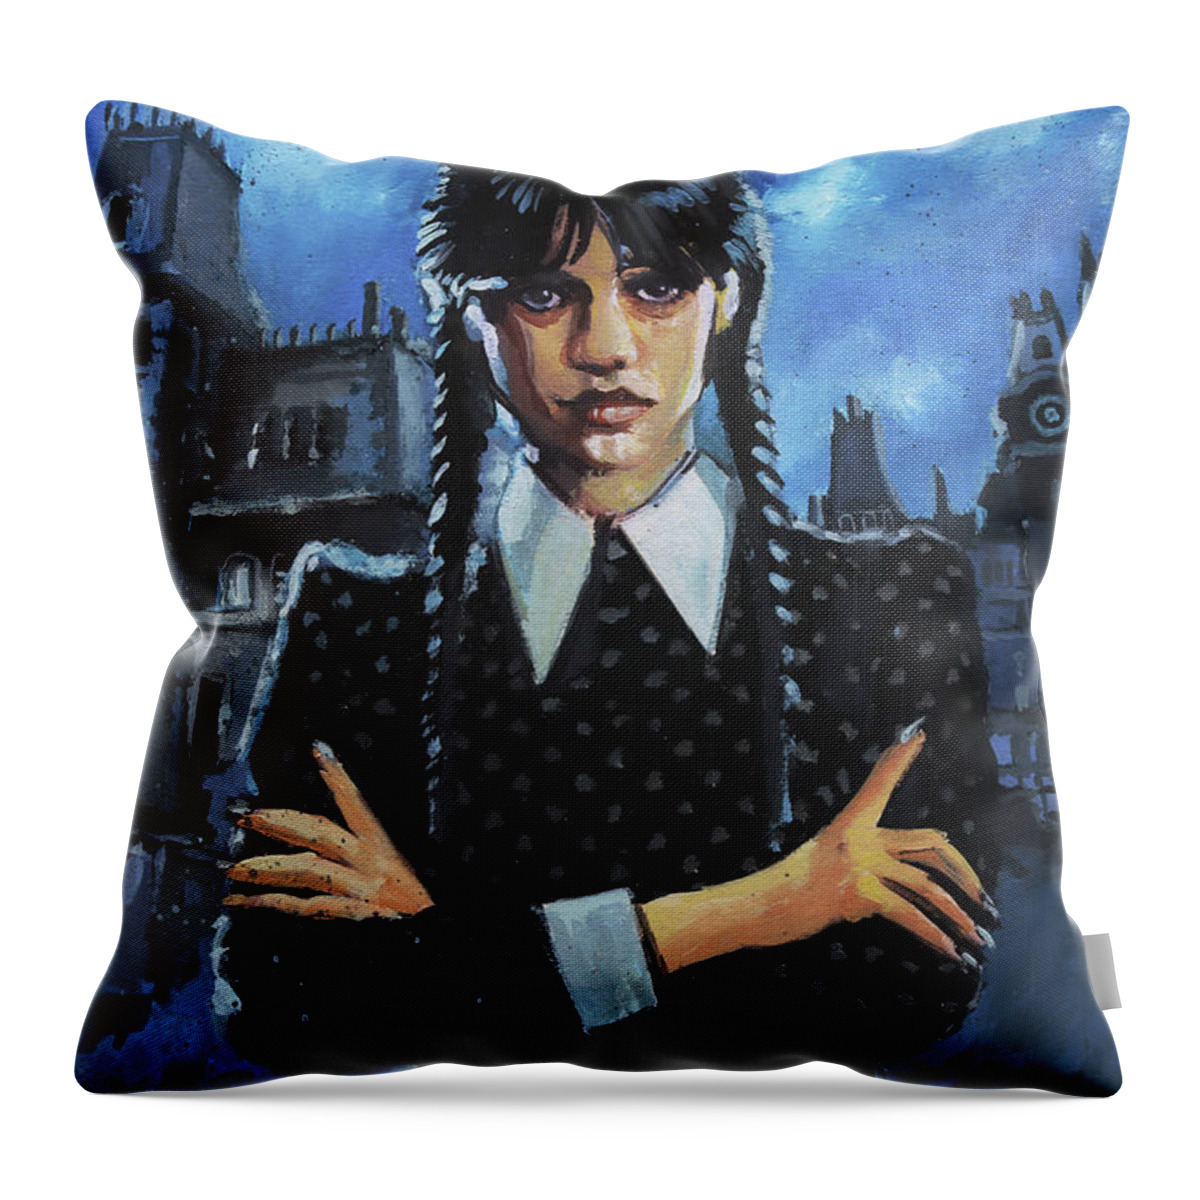 Addams Family Throw Pillow featuring the painting Wednesday Addams by Sv Bell